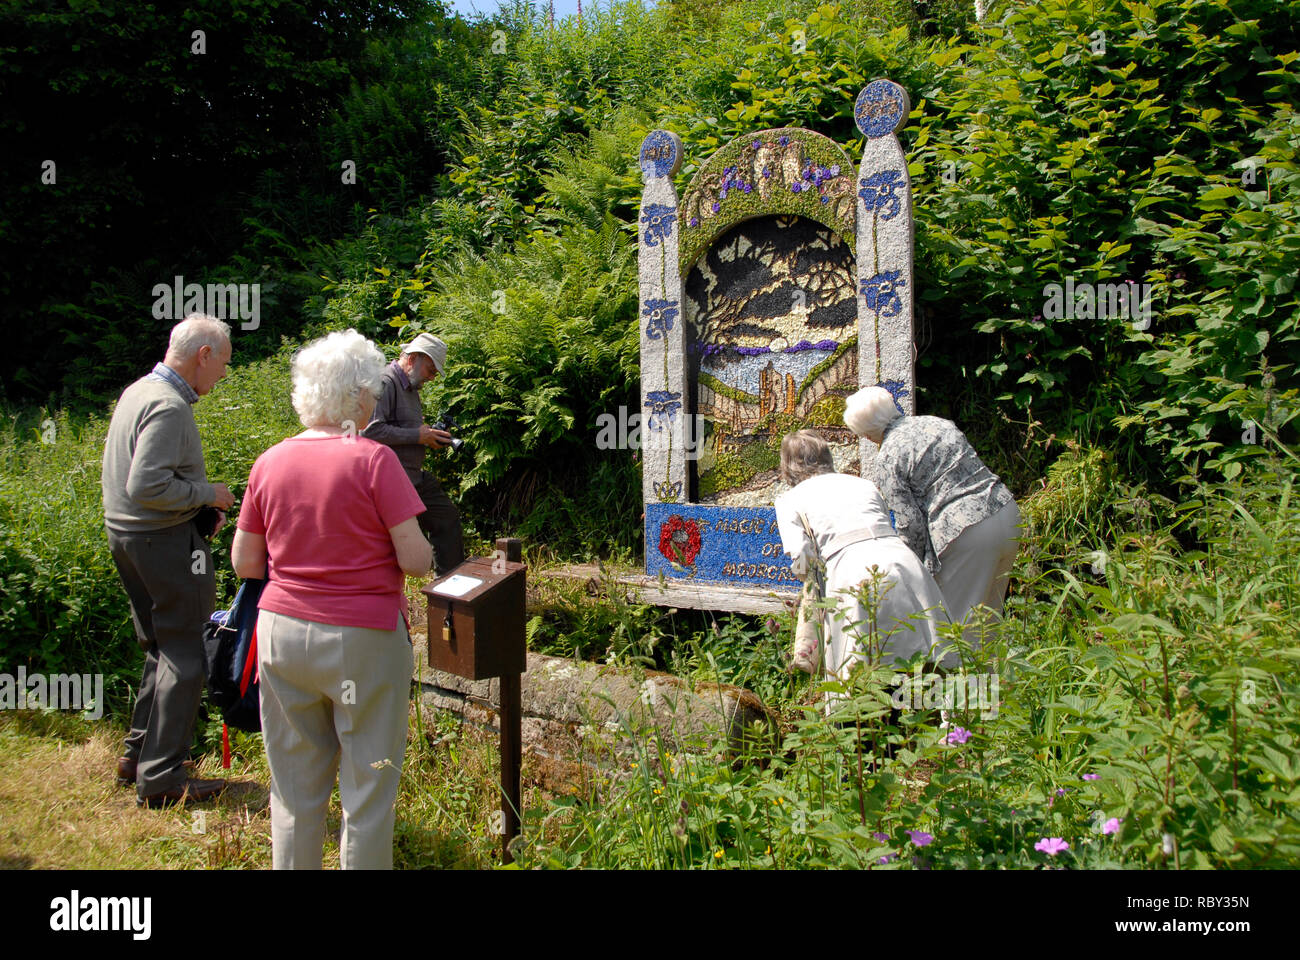 Five elderly people looking an example of well dressing, Youlgreave, Derbyshire, England. Stock Photo